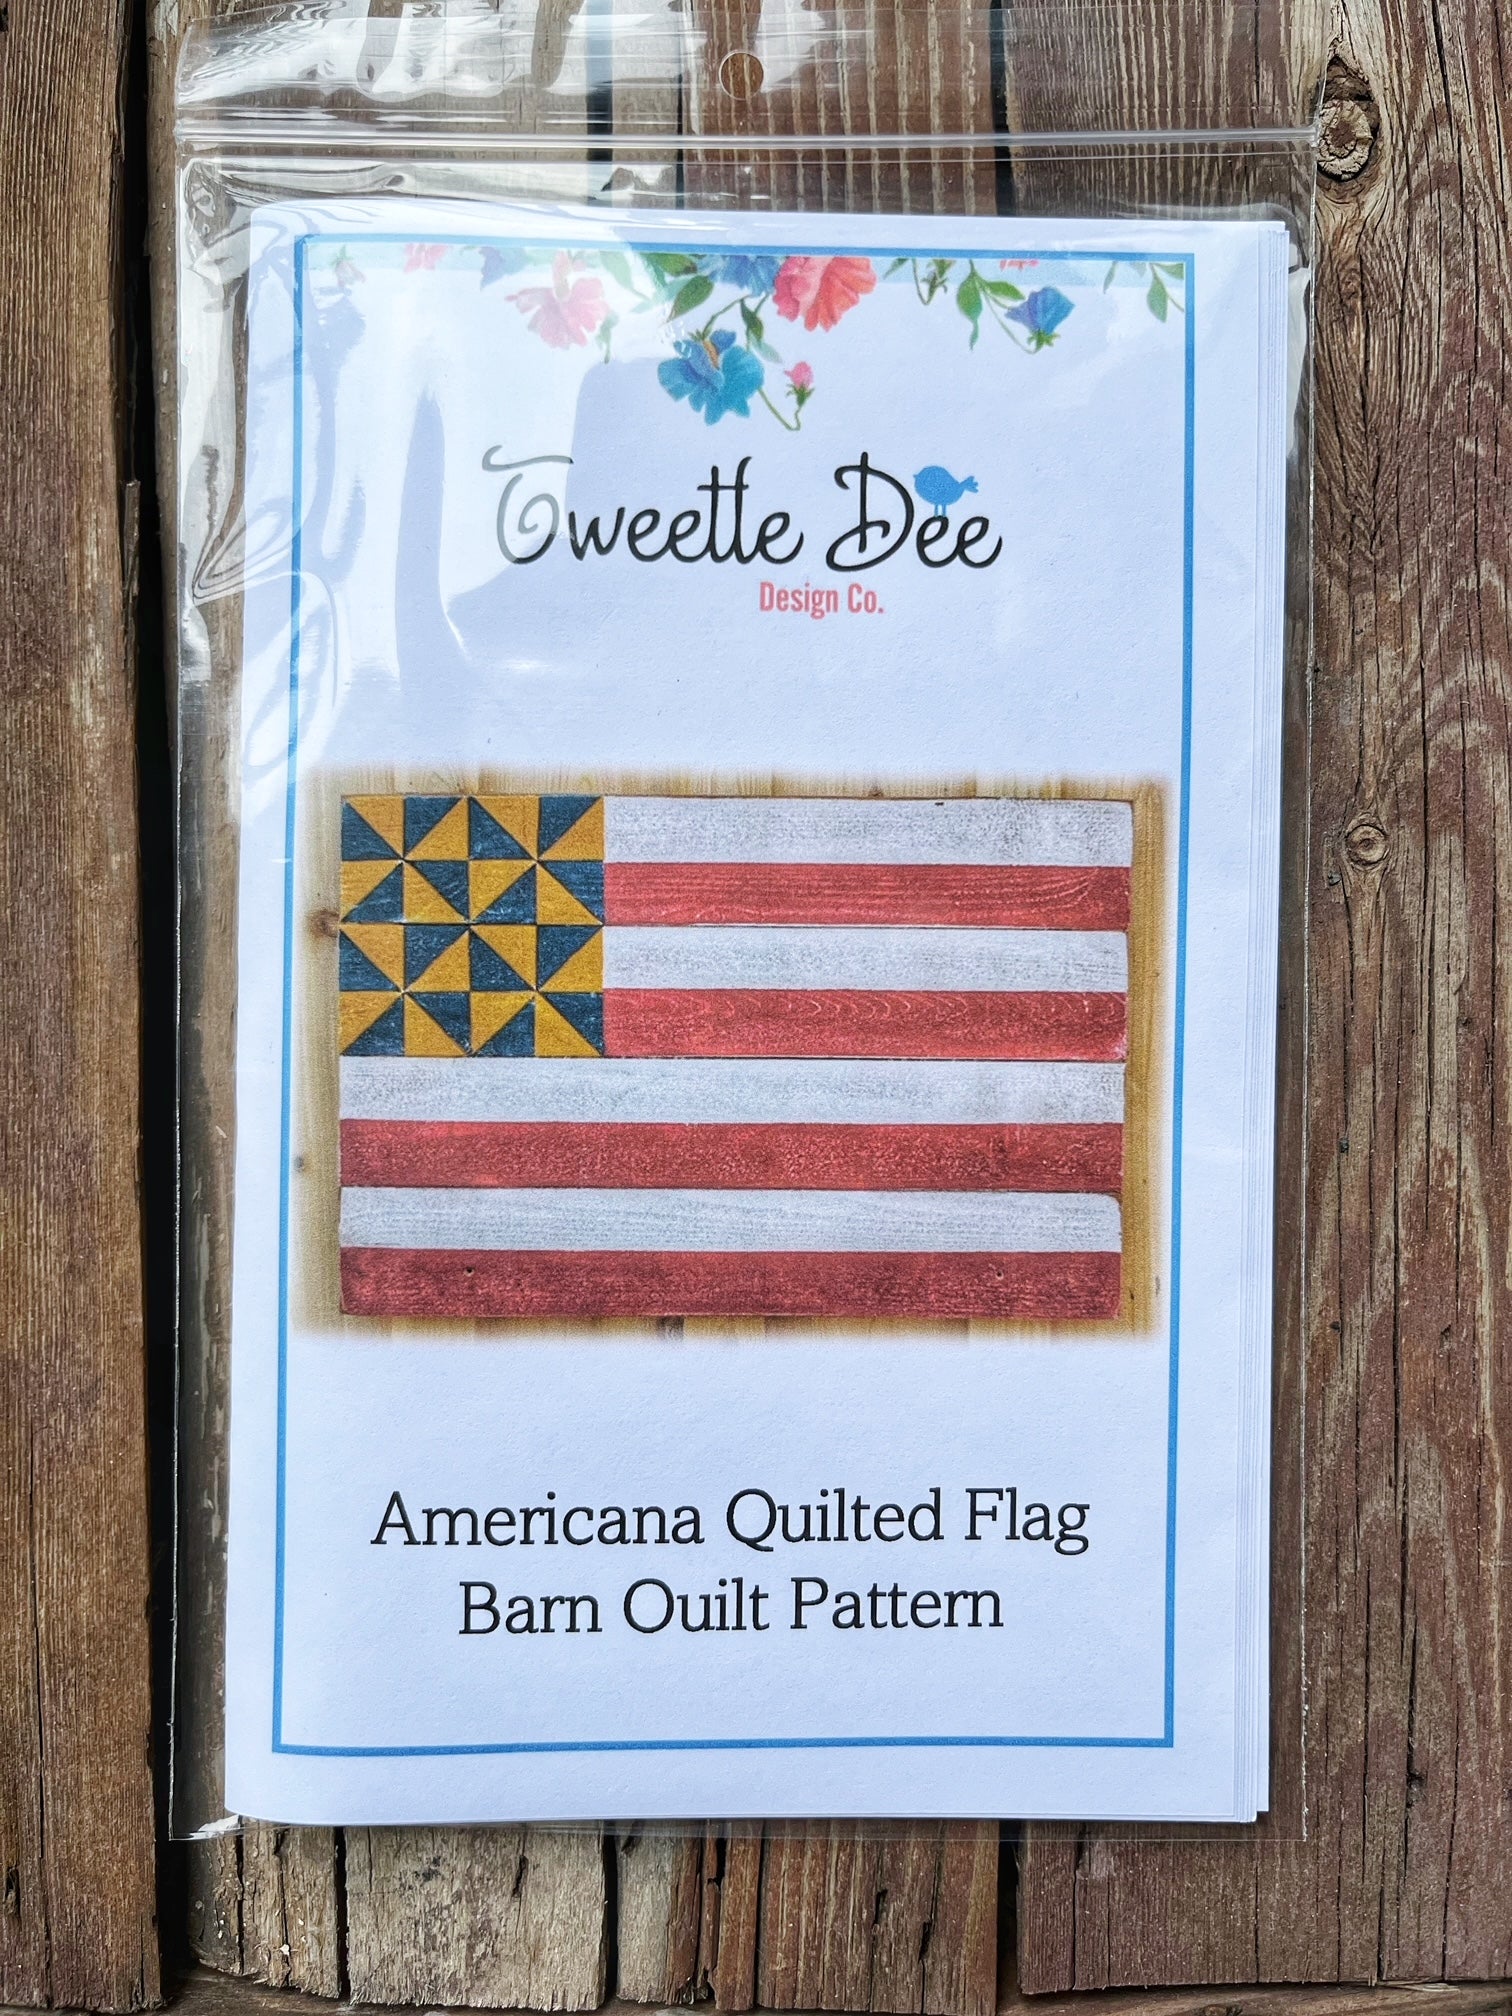 American Quilted Flag Barn Quilt Pattern